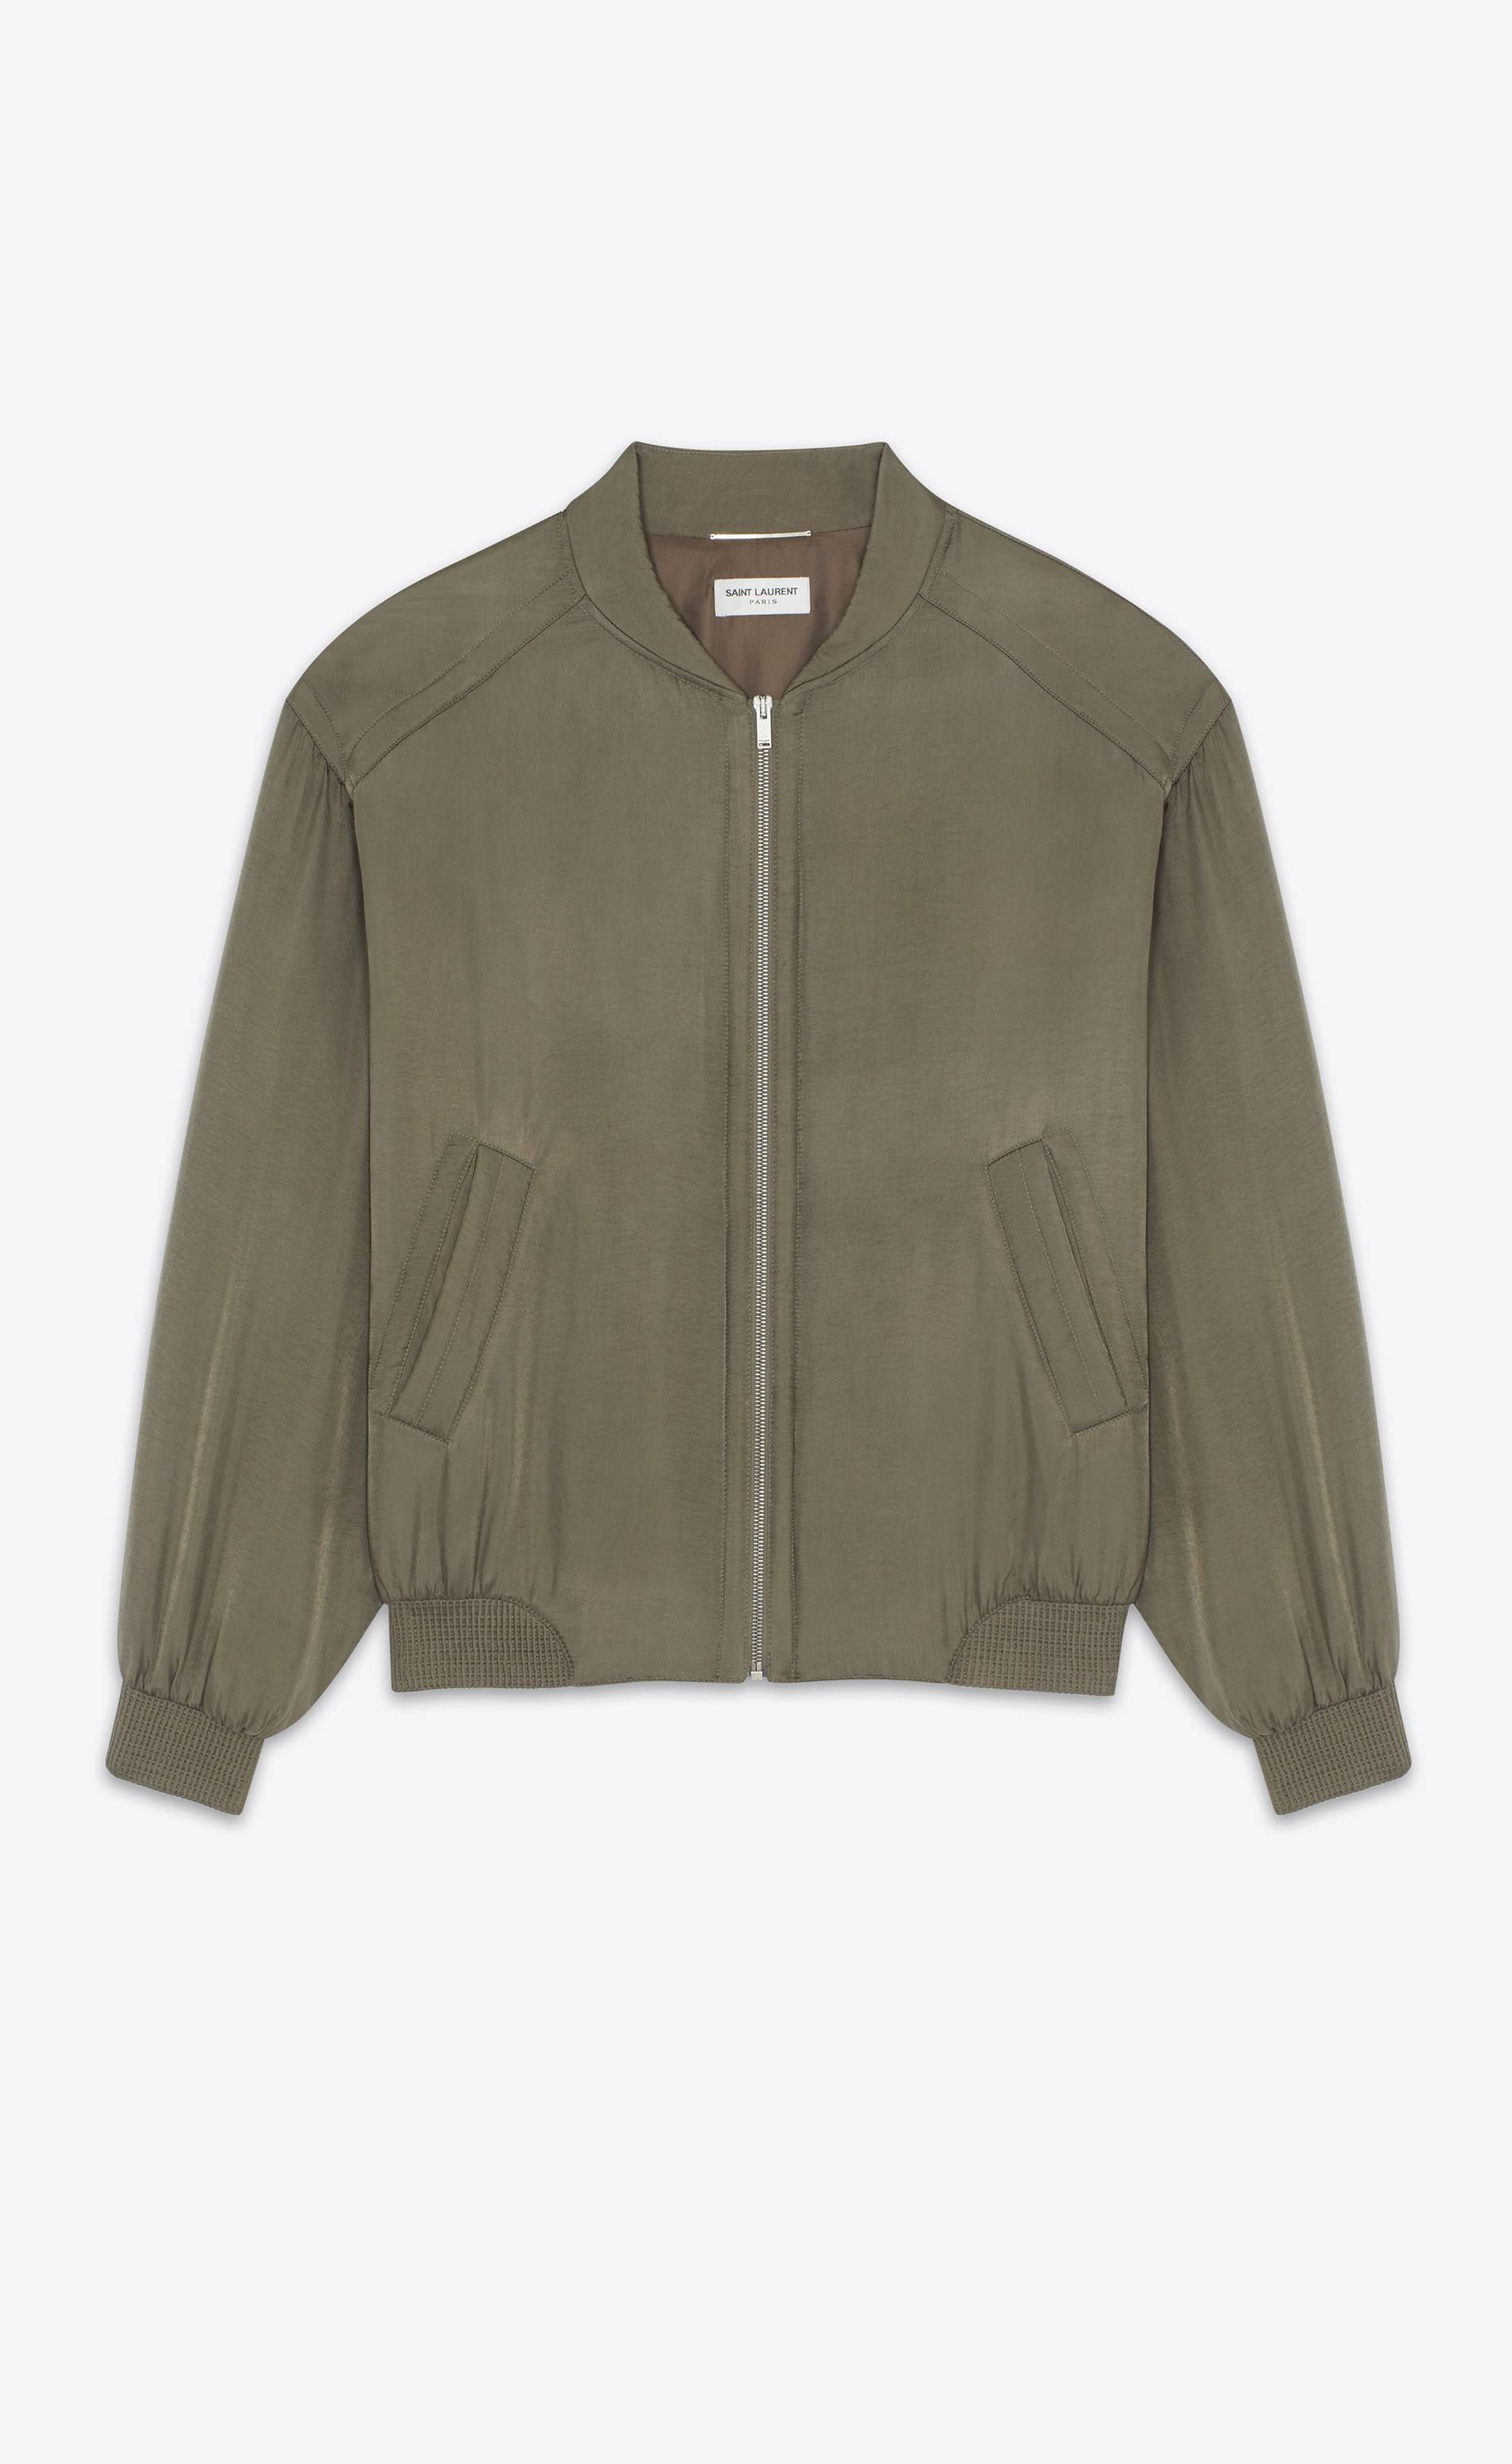 5 Must-Have Men's Jackets For Spring